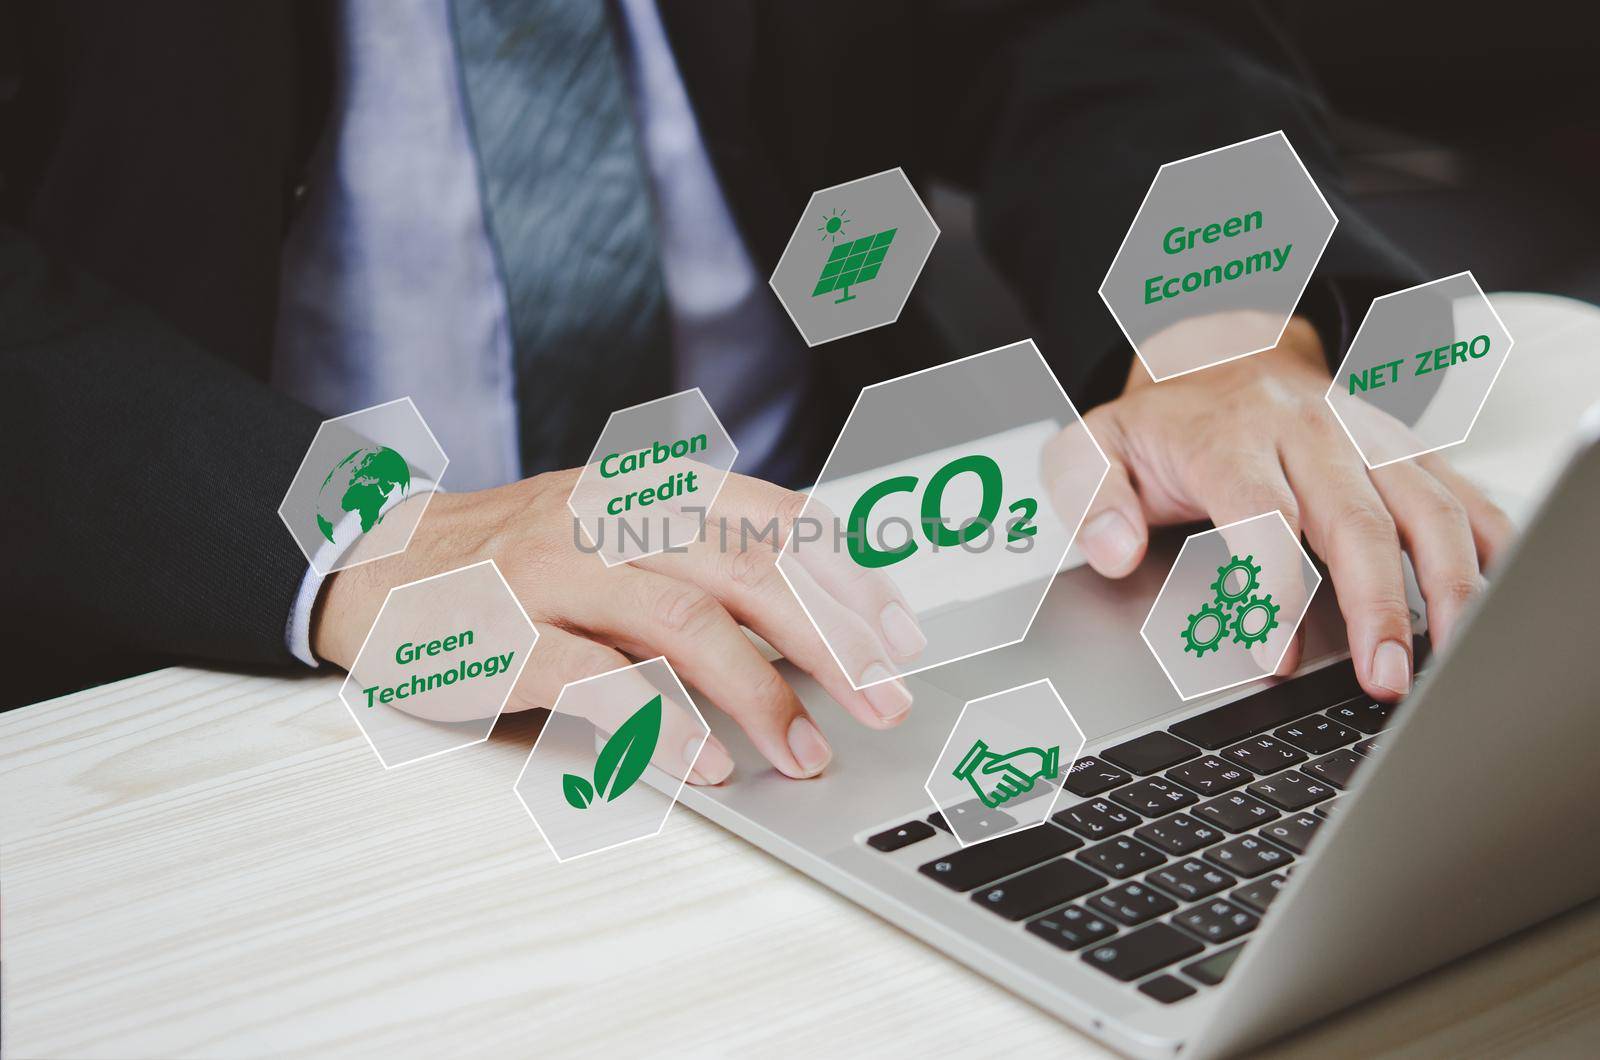 Organizations or companies develop carbon credit business virtual screen. Reduce CO2 emissions. Sustainable business development concept. by aoo3771